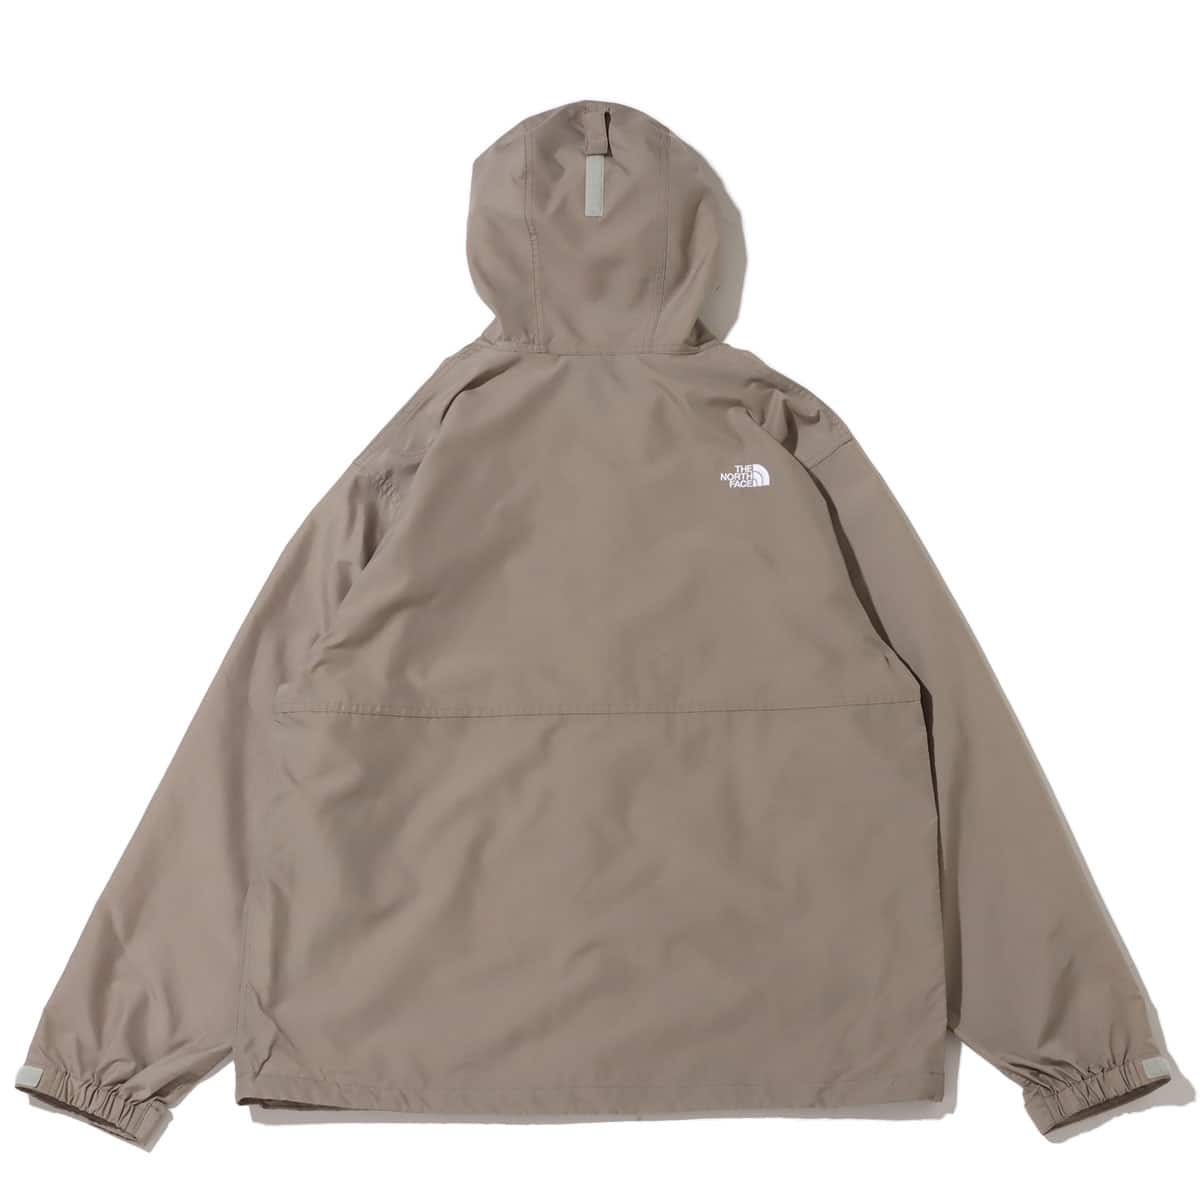 THE NORTH FACE COMPACT JACKET ミネラルグレー 23SS-I